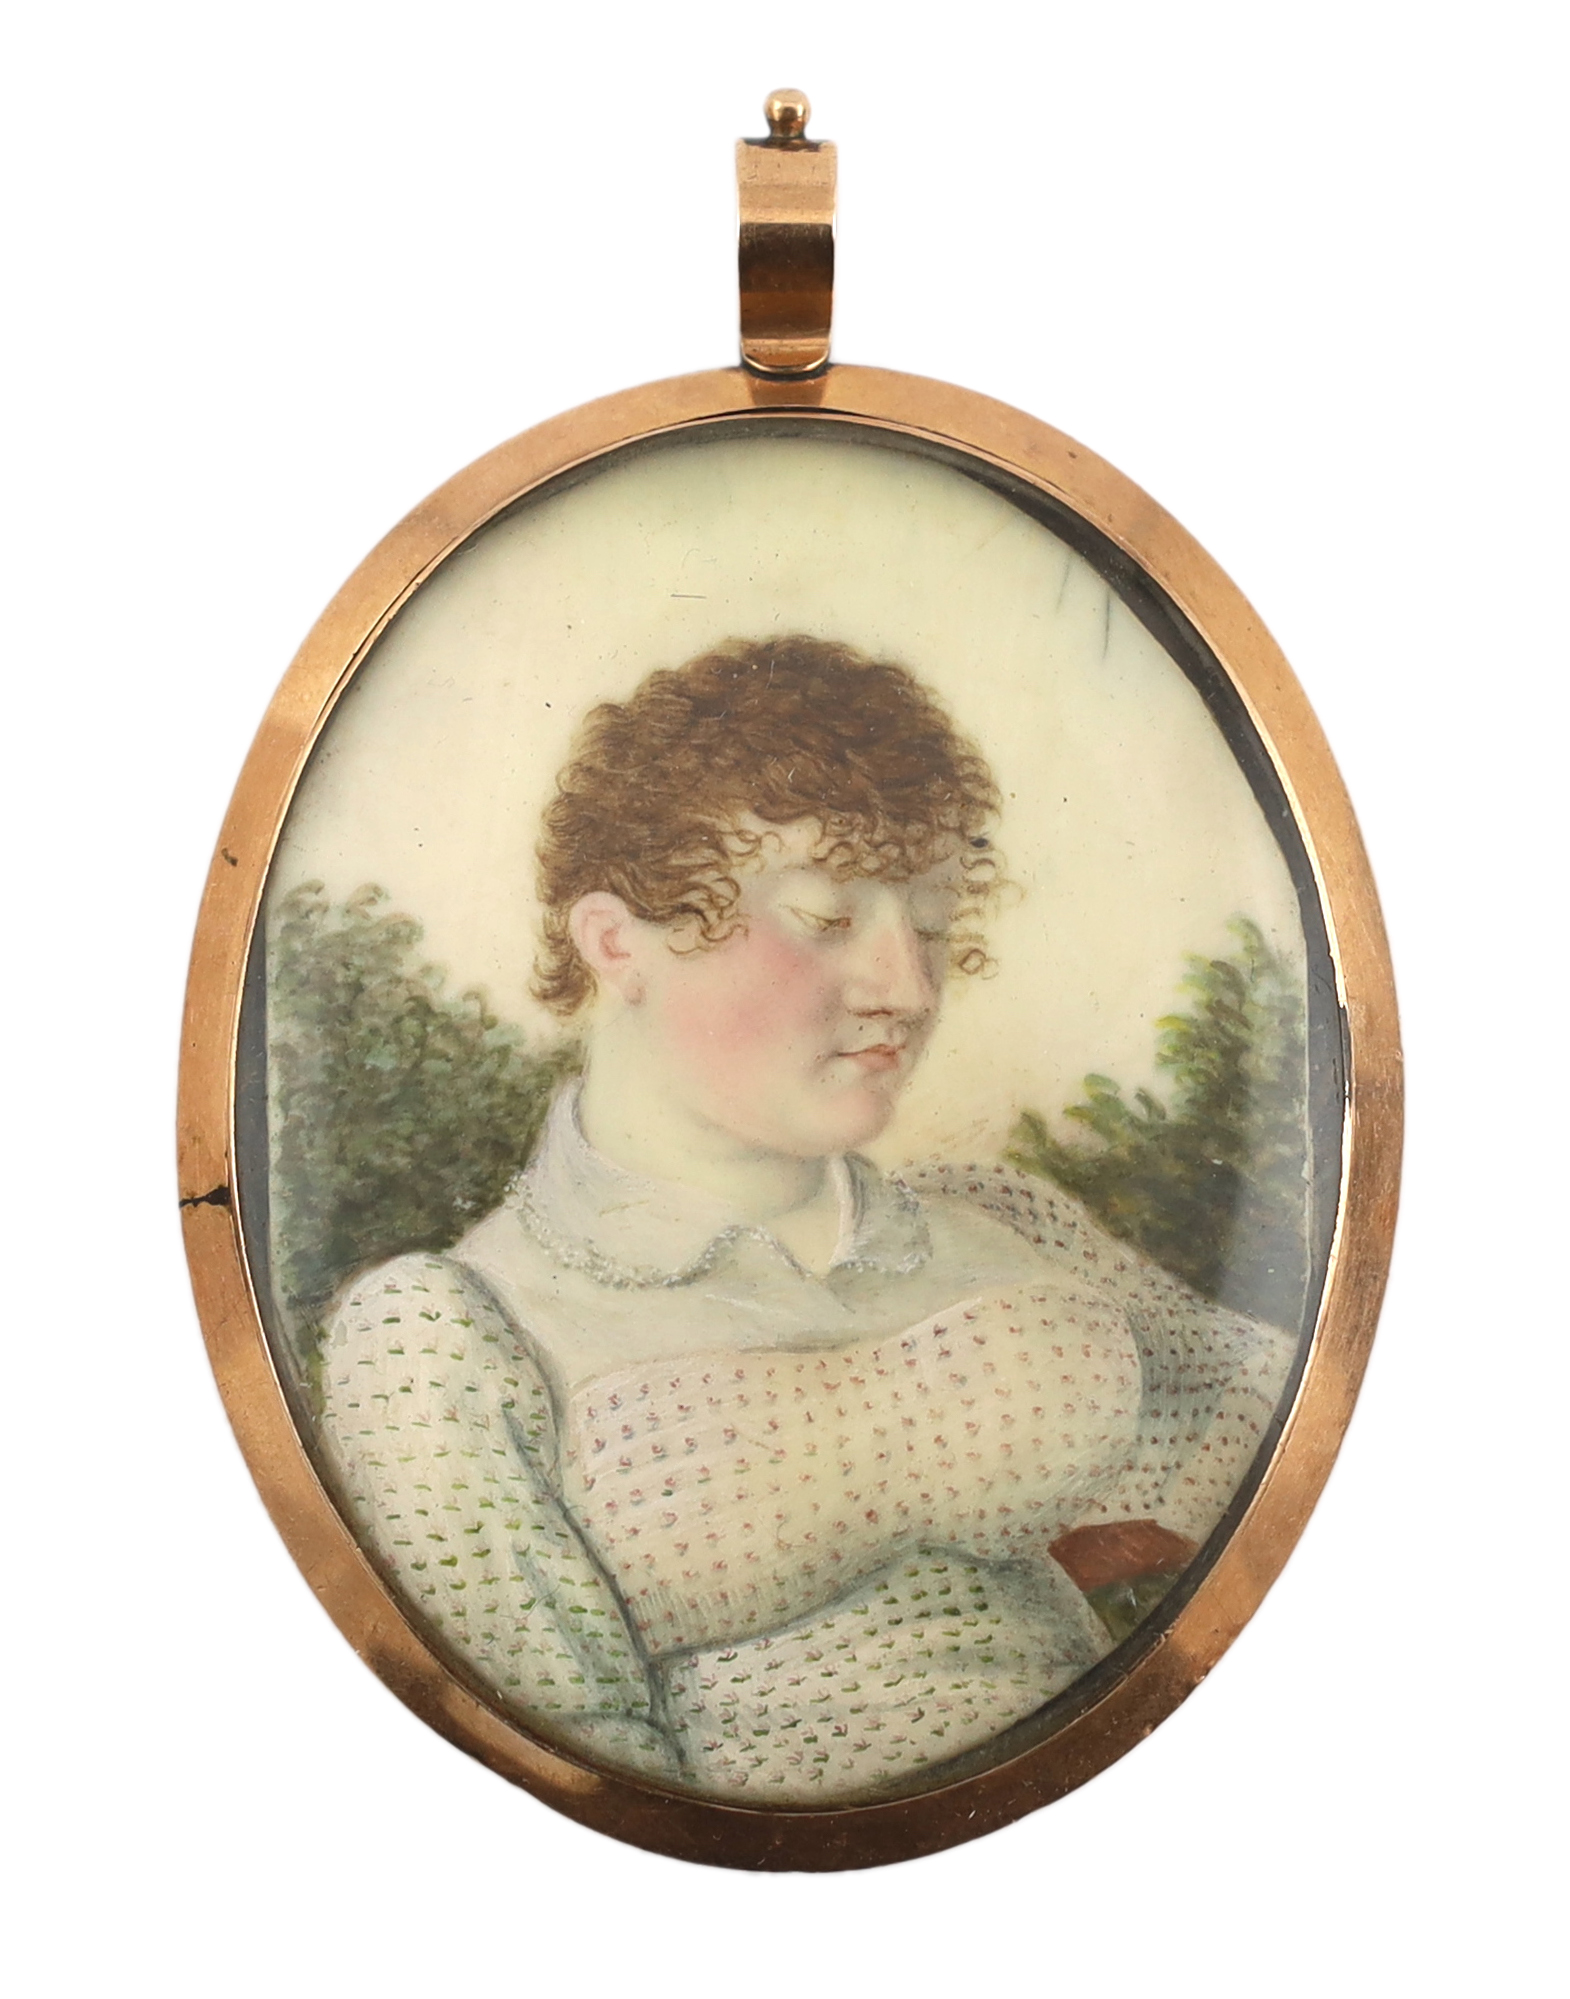 English School circa 1830, Portrait miniature of 'Mrs Hawker, wife of a Cornish clergyman', watercolour on ivory, 6.3 x 4.8cm. CITES Submission reference 2RFY46DM